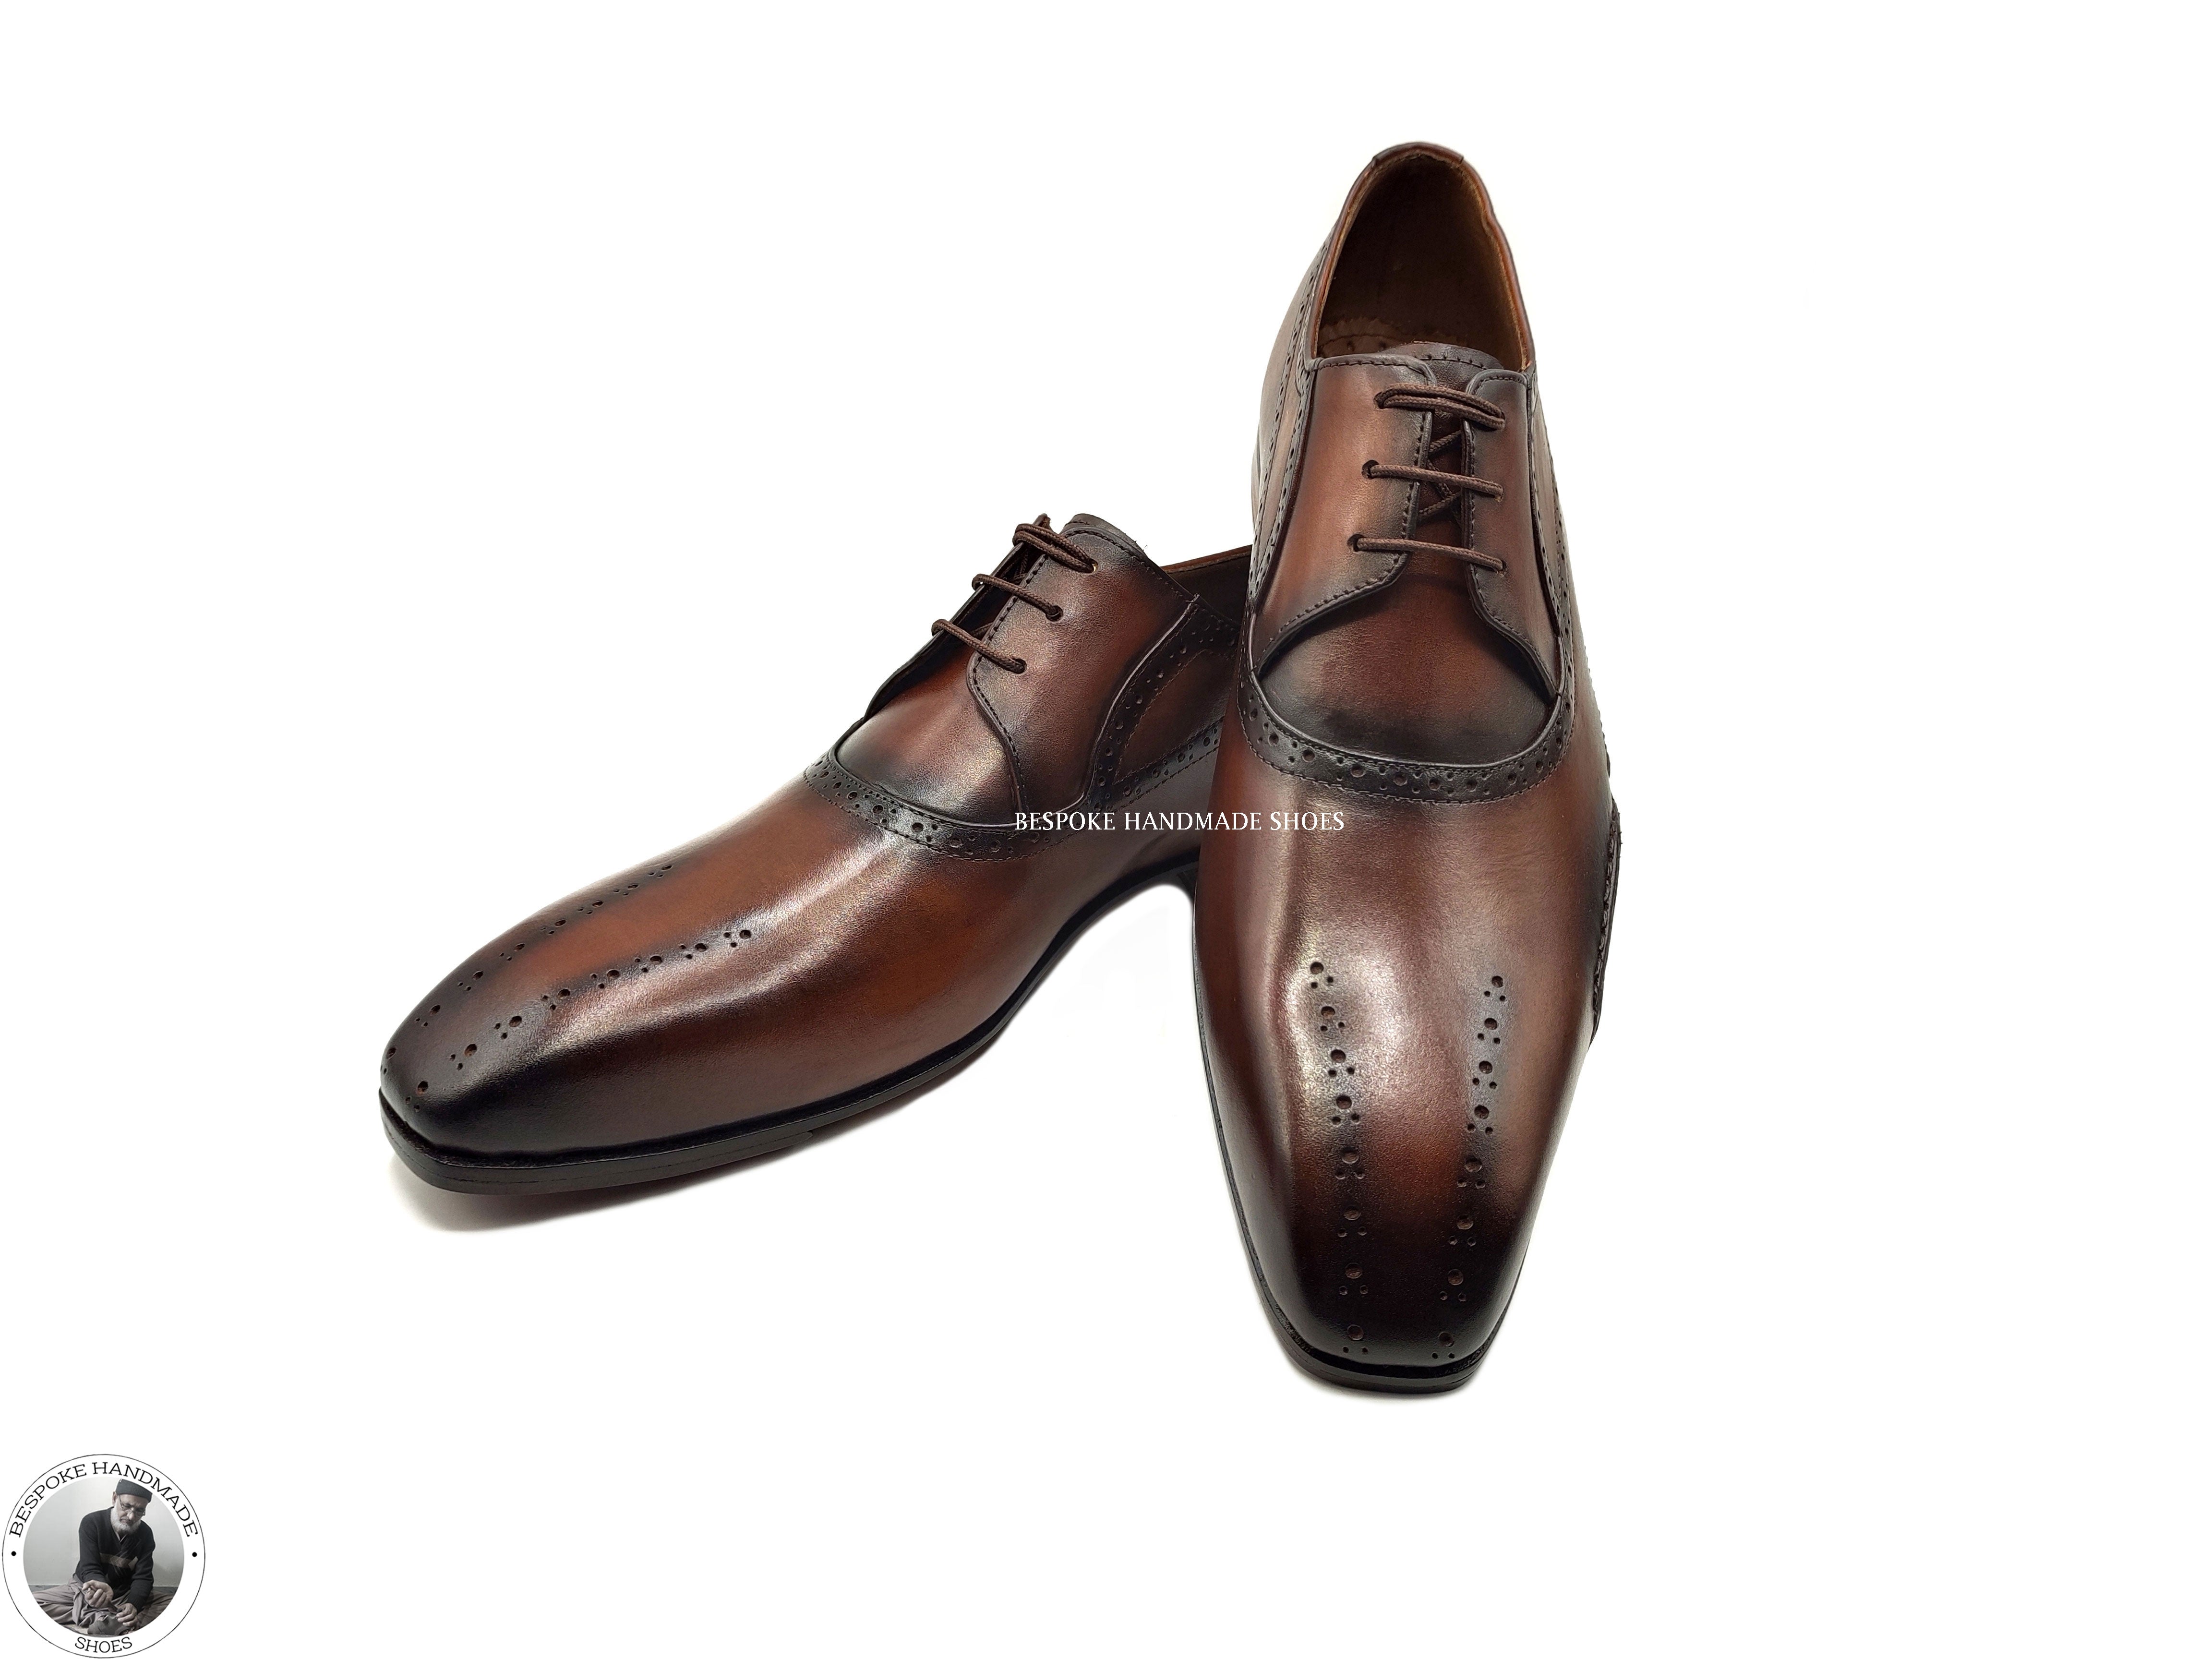 Bespoke Dress Genuine Brown Color Hand Painted Leather Shoe, Whole Cut Oxford Wingtip Lace up Shoes For Men's